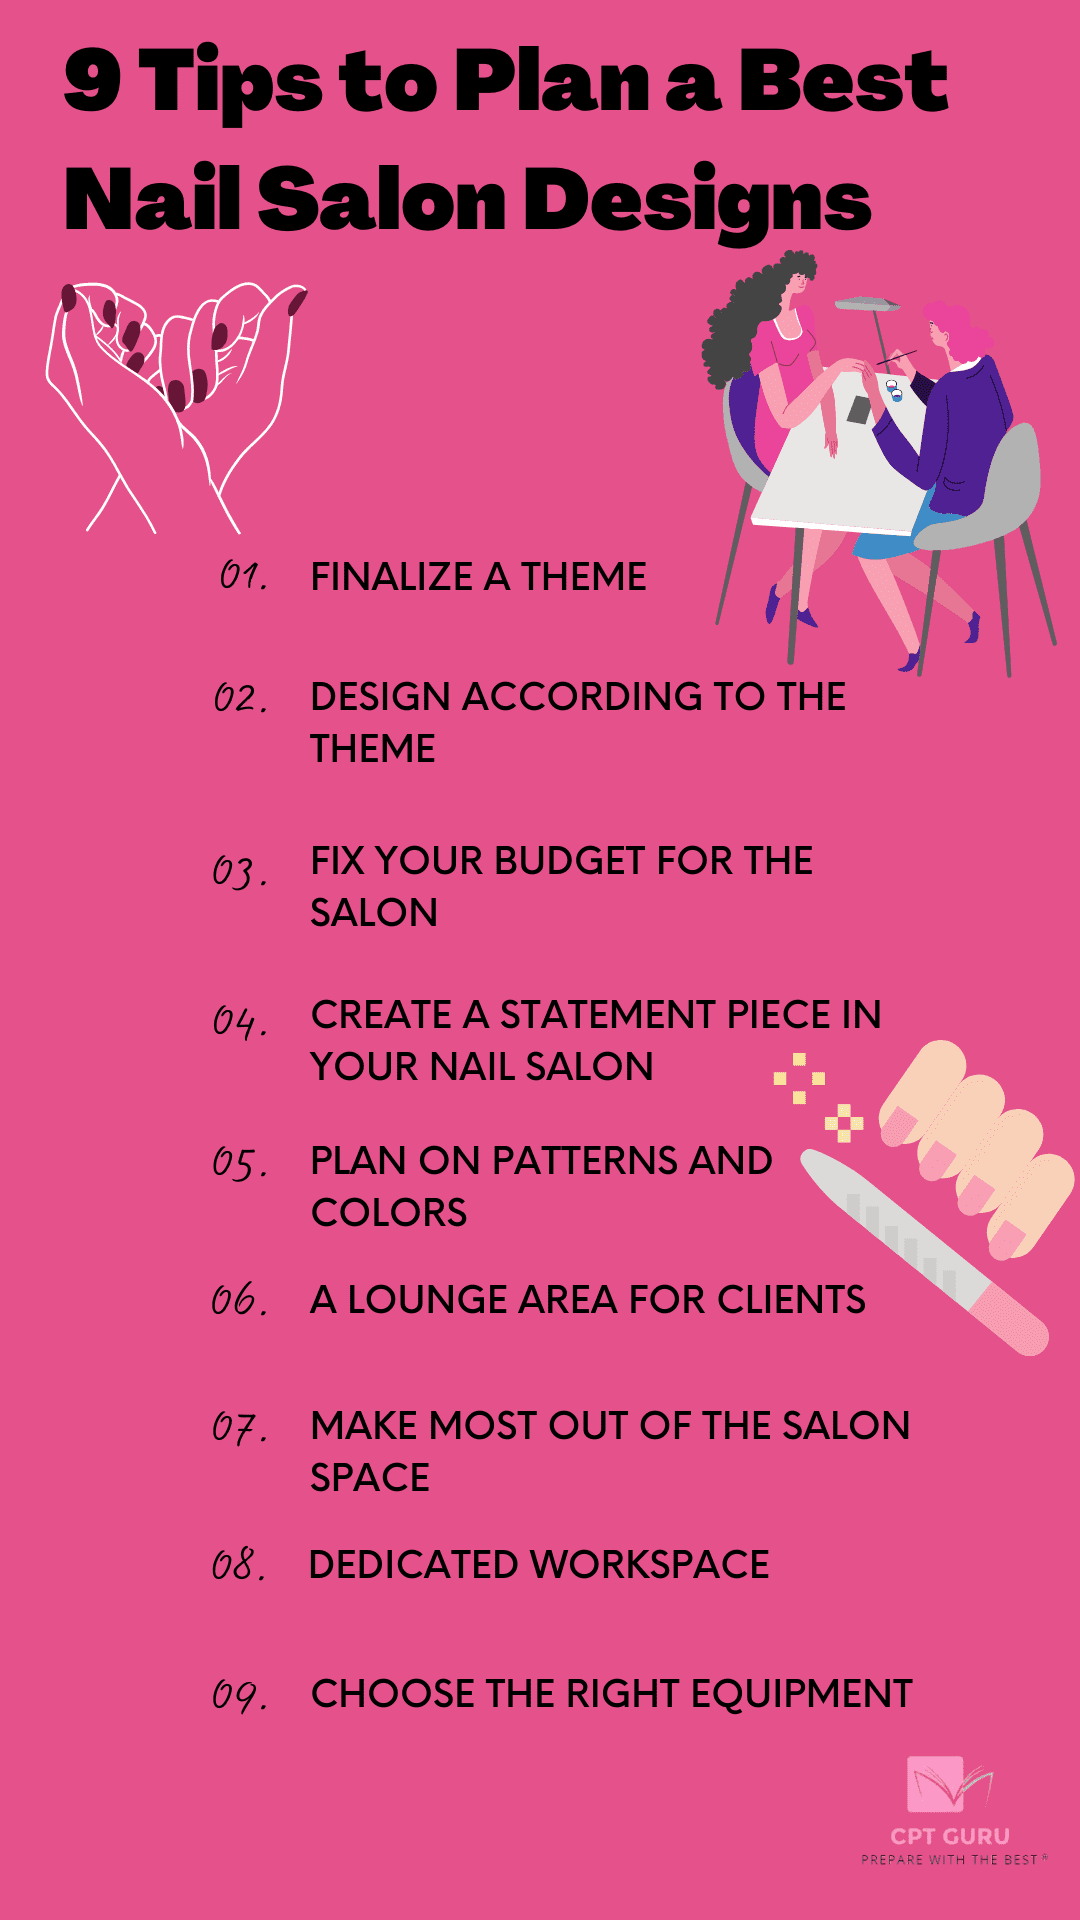 9 Tips to Plan a Best Nail Salon Designs